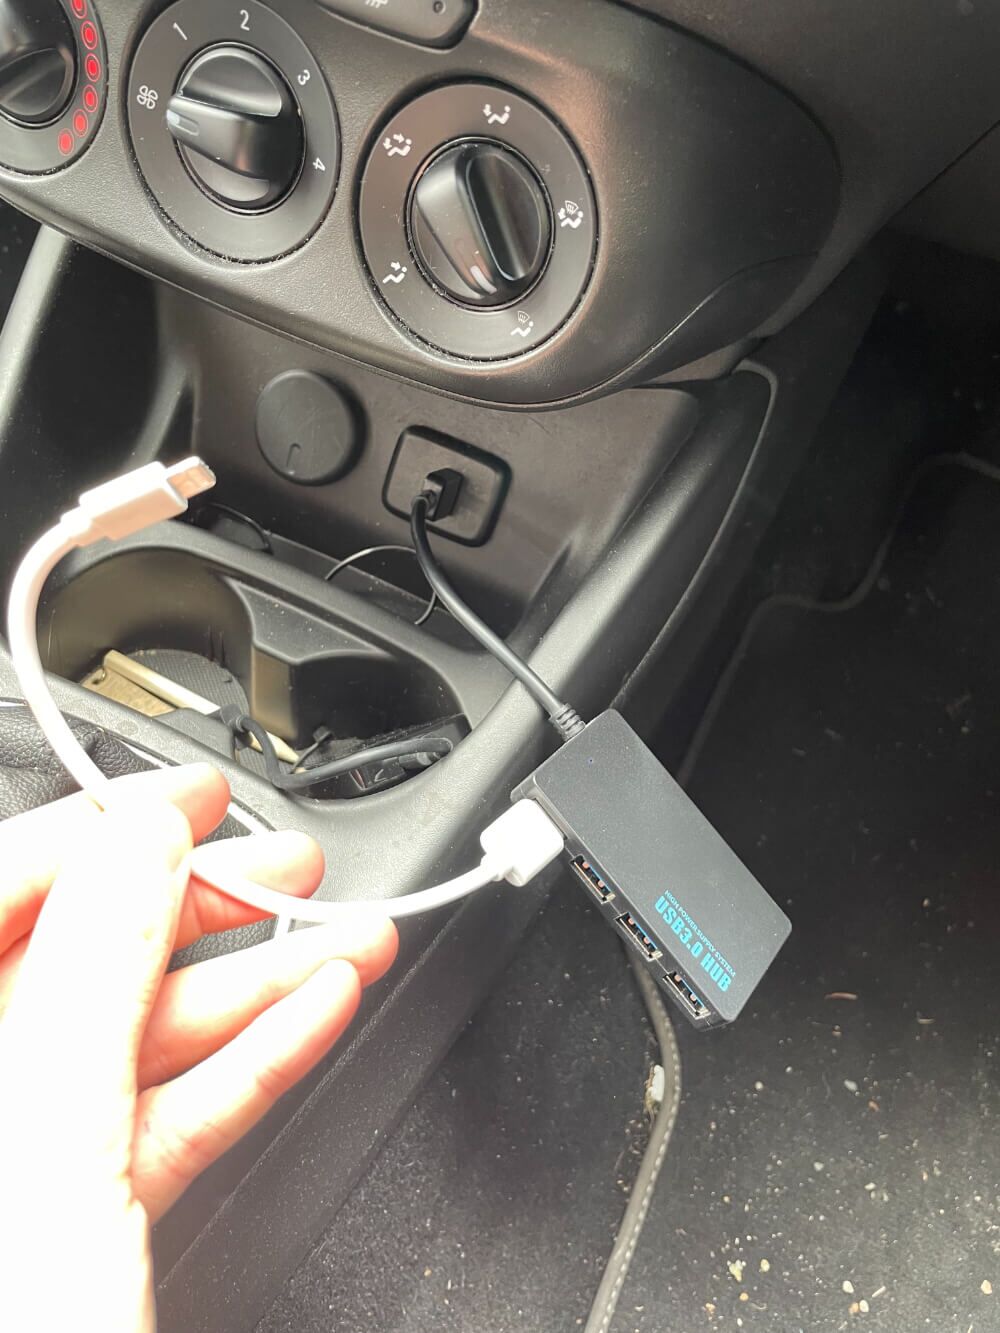 trying to use usb splitter with carplay